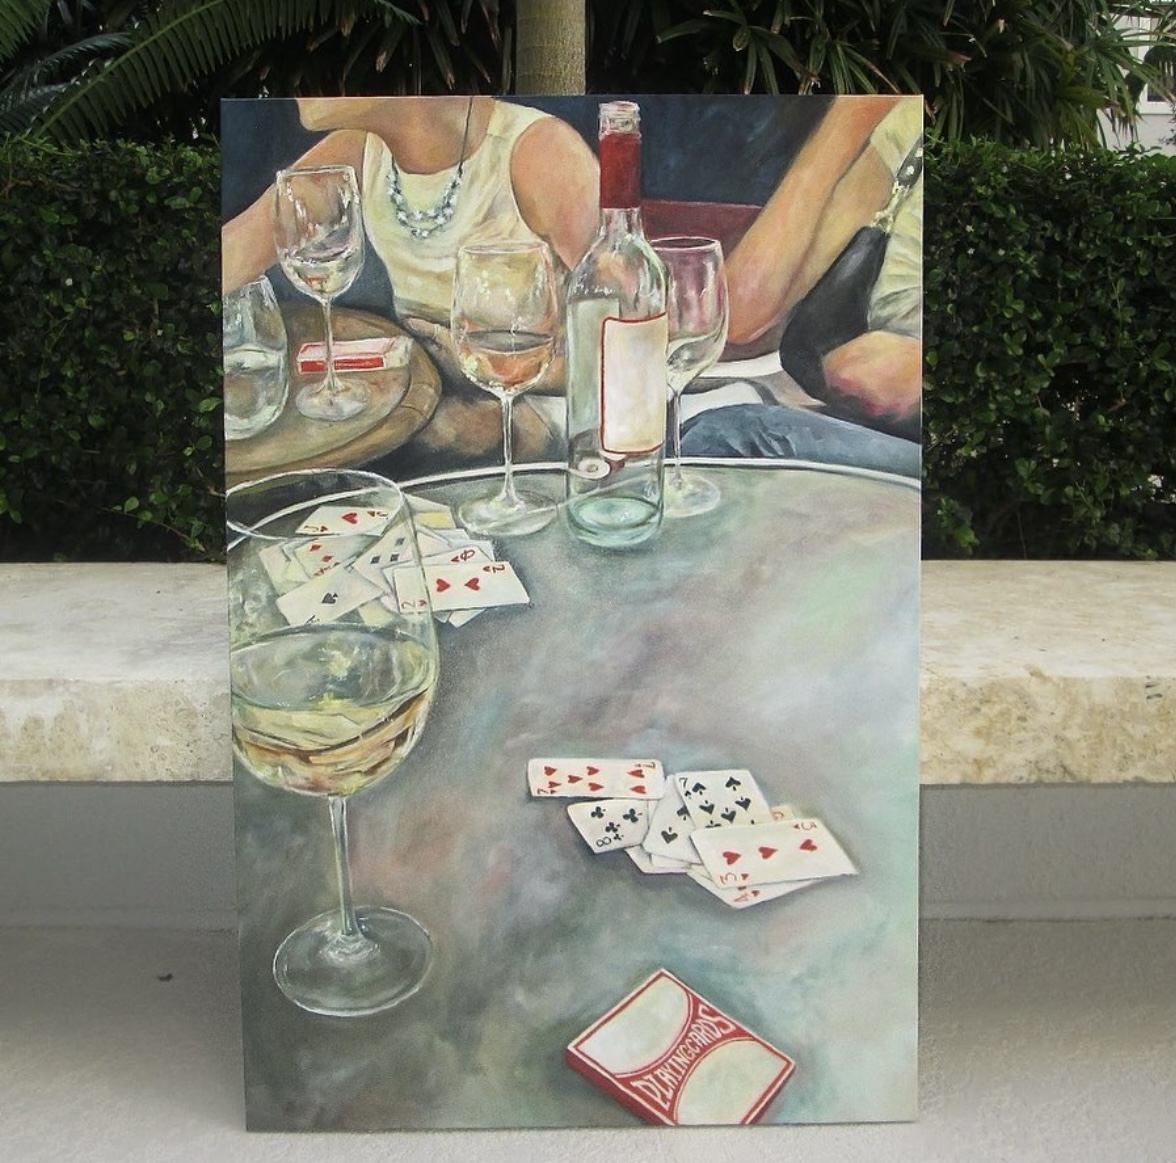 A painting of playing cards and a glass of wine on a table